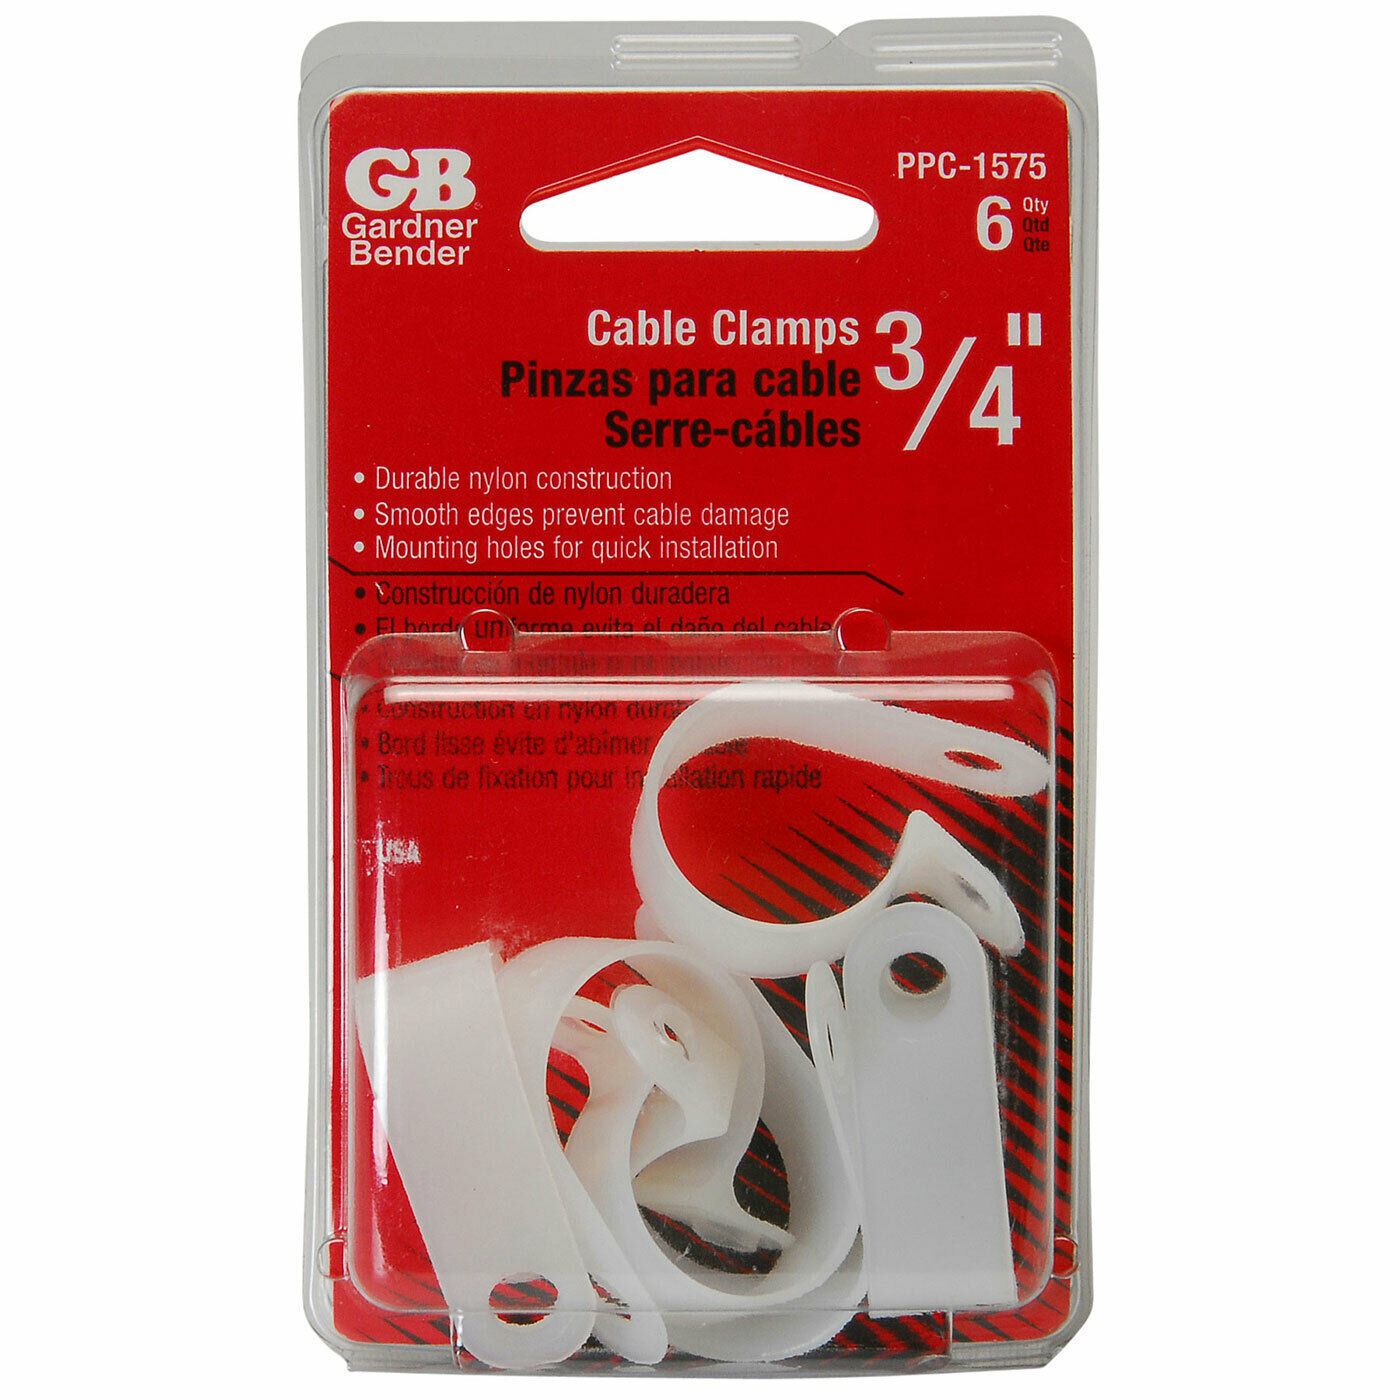 GB - PPC-1575 - 3/4" Nylon Cable Clamps Natural - 6 Pcs. - $8.95